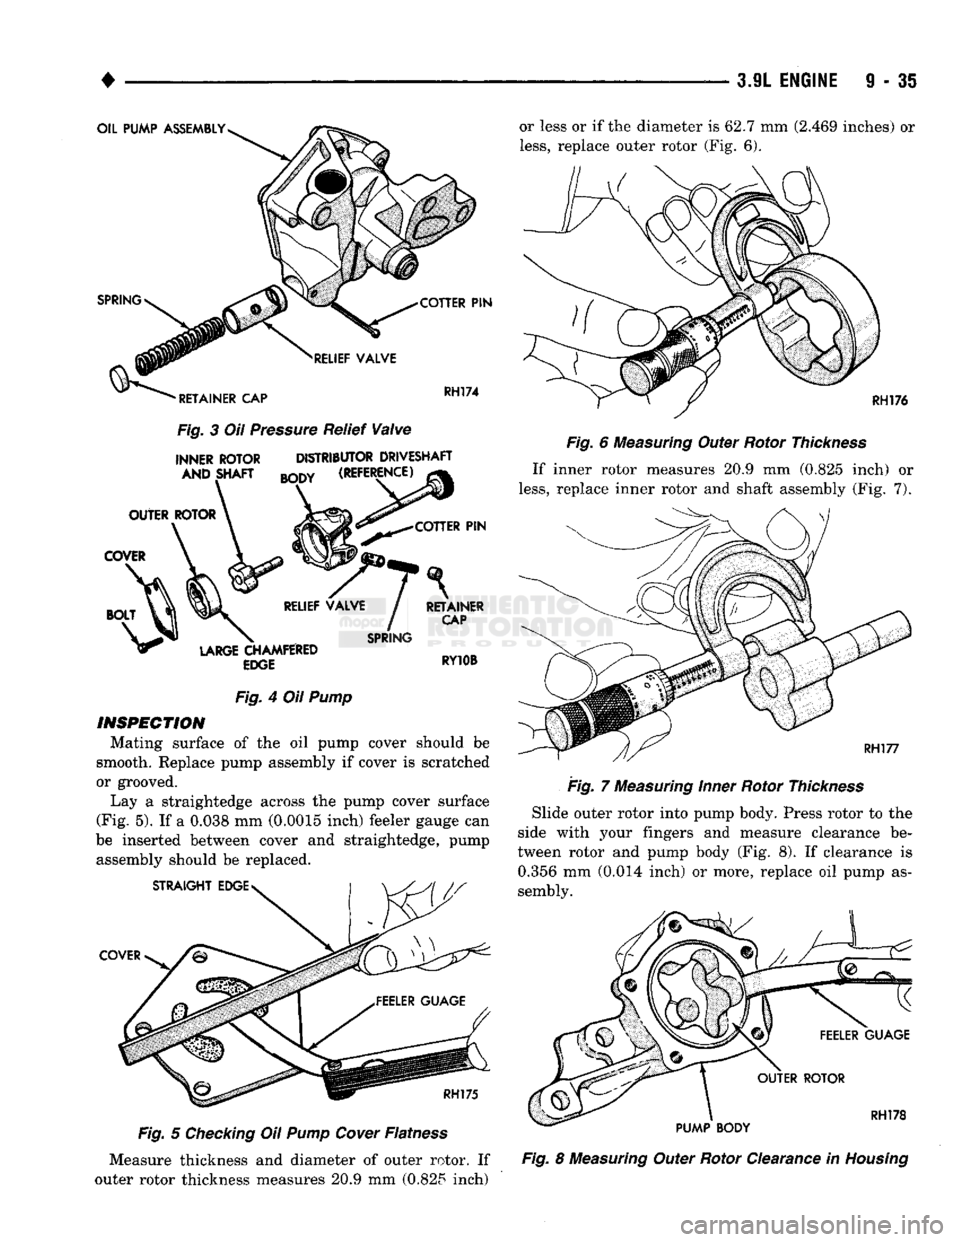 DODGE TRUCK 1993  Service Repair Manual 
OIL PUMP
 ASSEMBLY 

SPRING 
 RELIEF VALVE 
• RETAINER
 CAP 
 COTTER
 PIN 

RH174 

Fig.
 3 Oil
 Pressure
 Relief
 Valve 

INNER ROTOR  AND SHAFT  DISTRIBUTOR DRIVESHAFT 

mm
 (REFERENCE) 
COTTER
 